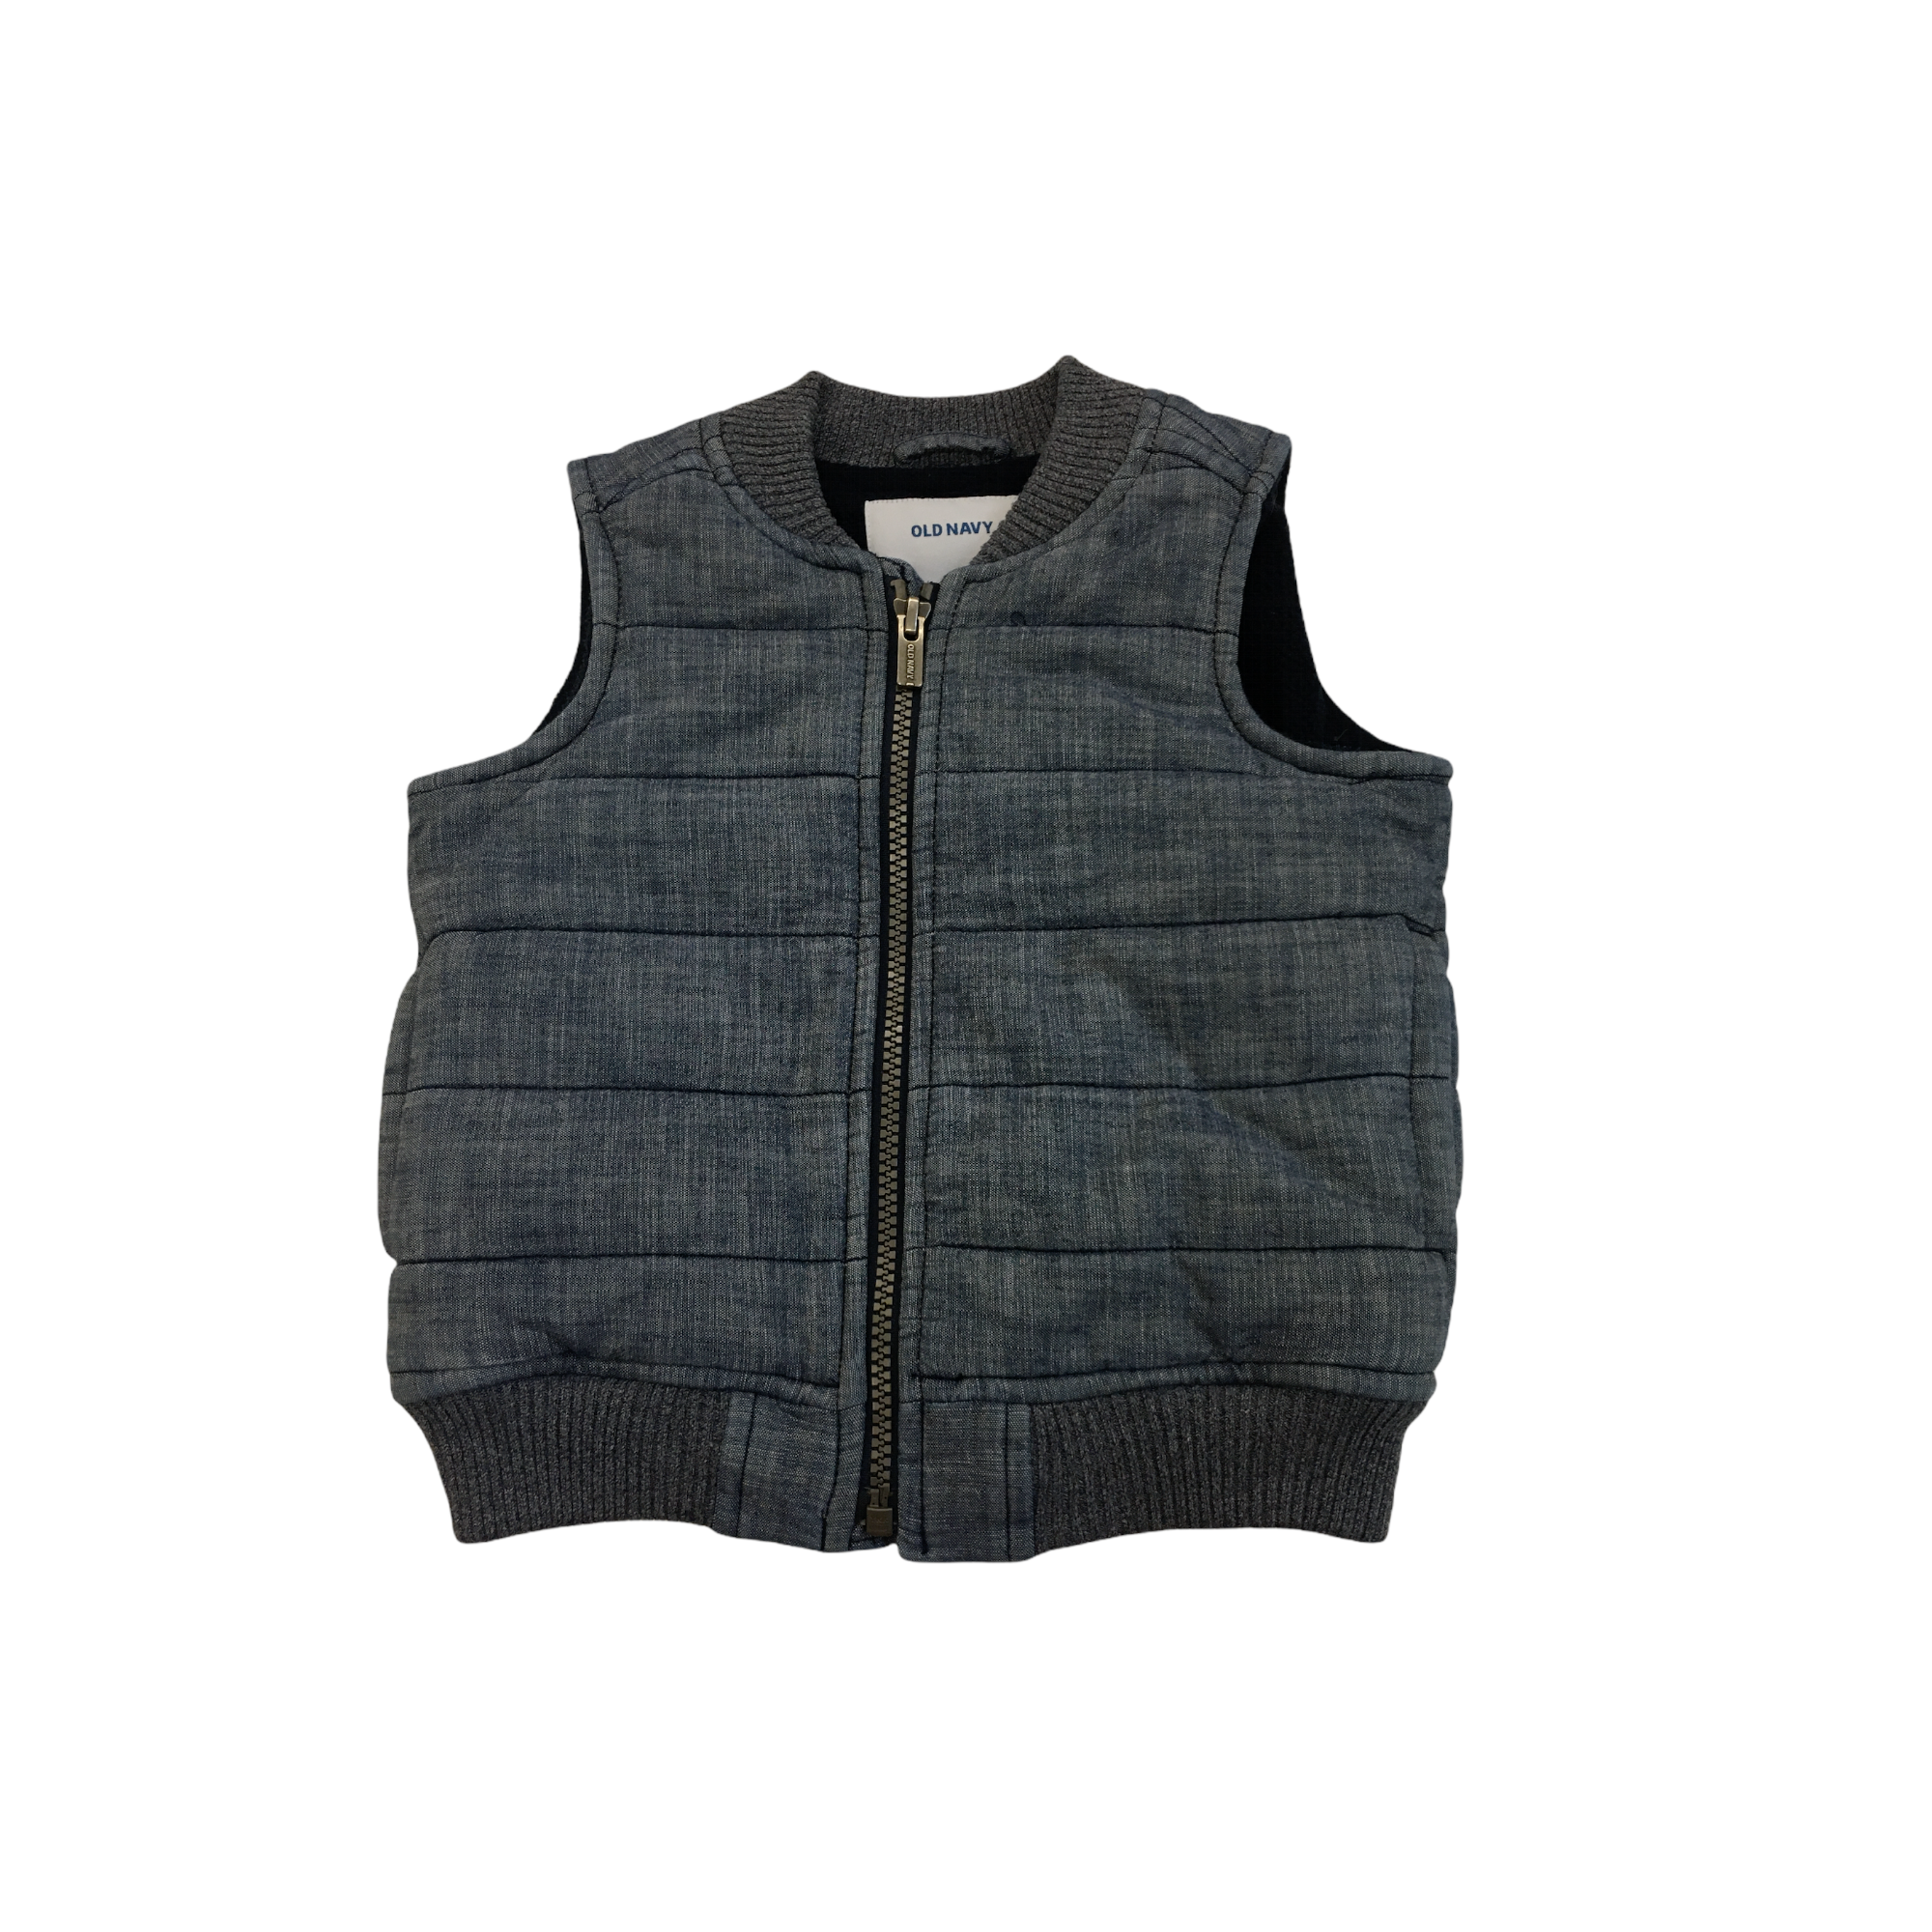 Vest, Boy, Size: 18/24m grey/blue


#resalerocks #pipsqueakresale #vancouverwa #portland #reusereducerecycle #fashiononabudget #chooseused #consignment #savemoney #shoplocal #weship #keepusopen #shoplocalonline #resale #resaleboutique #mommyandme #minime #fashion #reseller                                                                                                                                      Cross posted, items are located at #PipsqueakResaleBoutique, payments accepted: cash, paypal & credit cards. Any flaws will be described in the comments. More pictures available with link above. Local pick up available at the #VancouverMall, tax will be added (not included in price), shipping available (not included in price, *Clothing, shoes, books & DVDs for $6.99; please contact regarding shipment of toys or other larger items), item can be placed on hold with communication, message with any questions. Join Pipsqueak Resale - Online to see all the new items! Follow us on IG @pipsqueakresale & Thanks for looking! Due to the nature of consignment, any known flaws will be described; ALL SHIPPED SALES ARE FINAL. All items are currently located inside Pipsqueak Resale Boutique as a store front items purchased on location before items are prepared for shipment will be refunded.